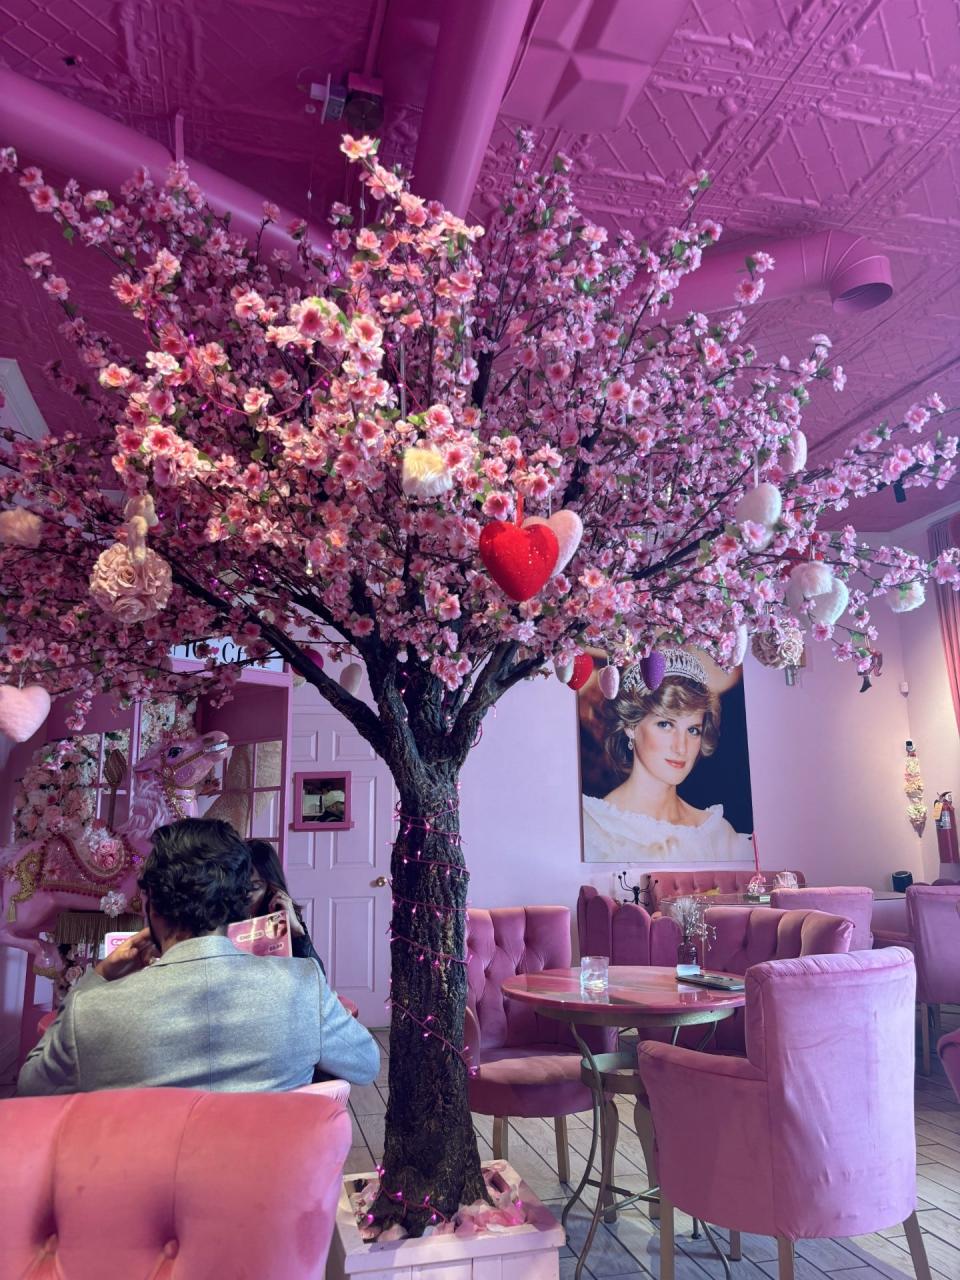 Amo Cafe, at 412 E. Yandell Drive, is one of two pink-themed restaurants in the Downtown El Paso area. The restaurant offers coffees, boba tea, sandwiches, waffles and desserts.